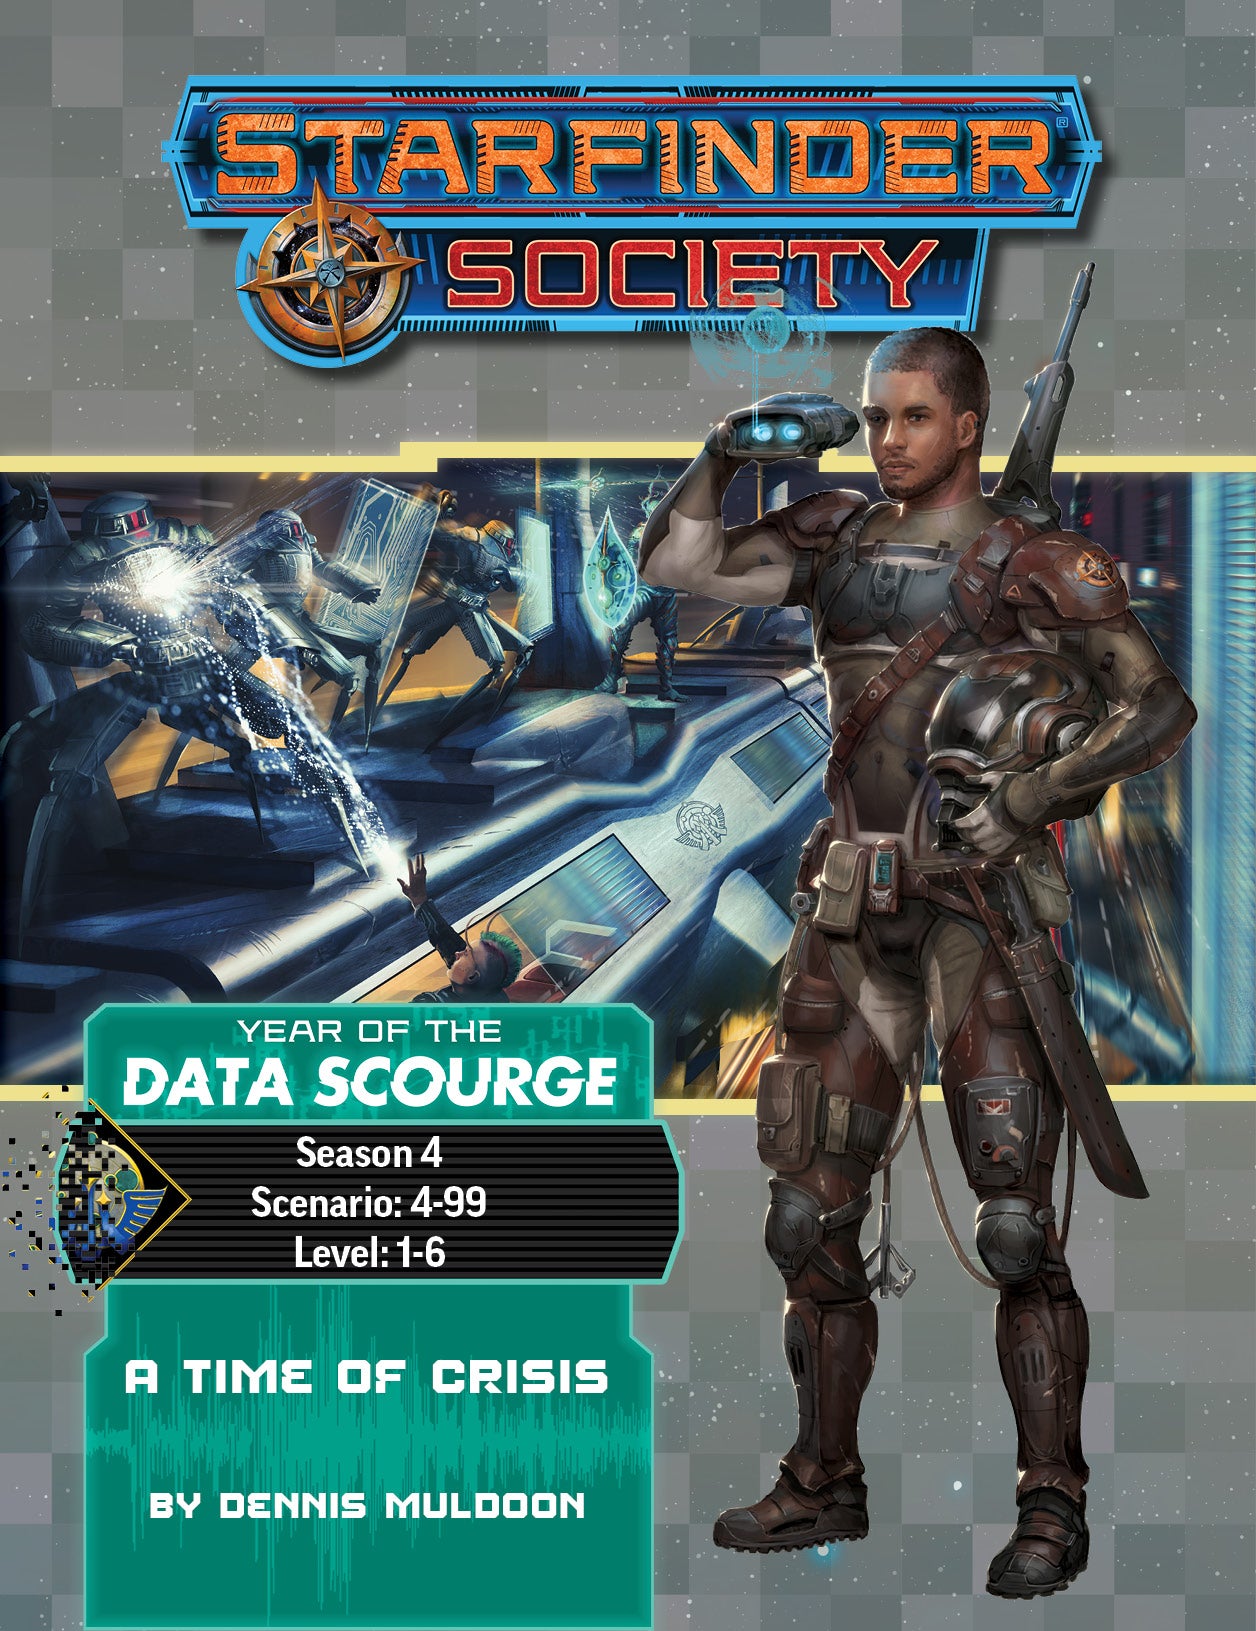 Starfinder Society Year of the Data Scourge - A Time of Crisis by Dennis Muldoon